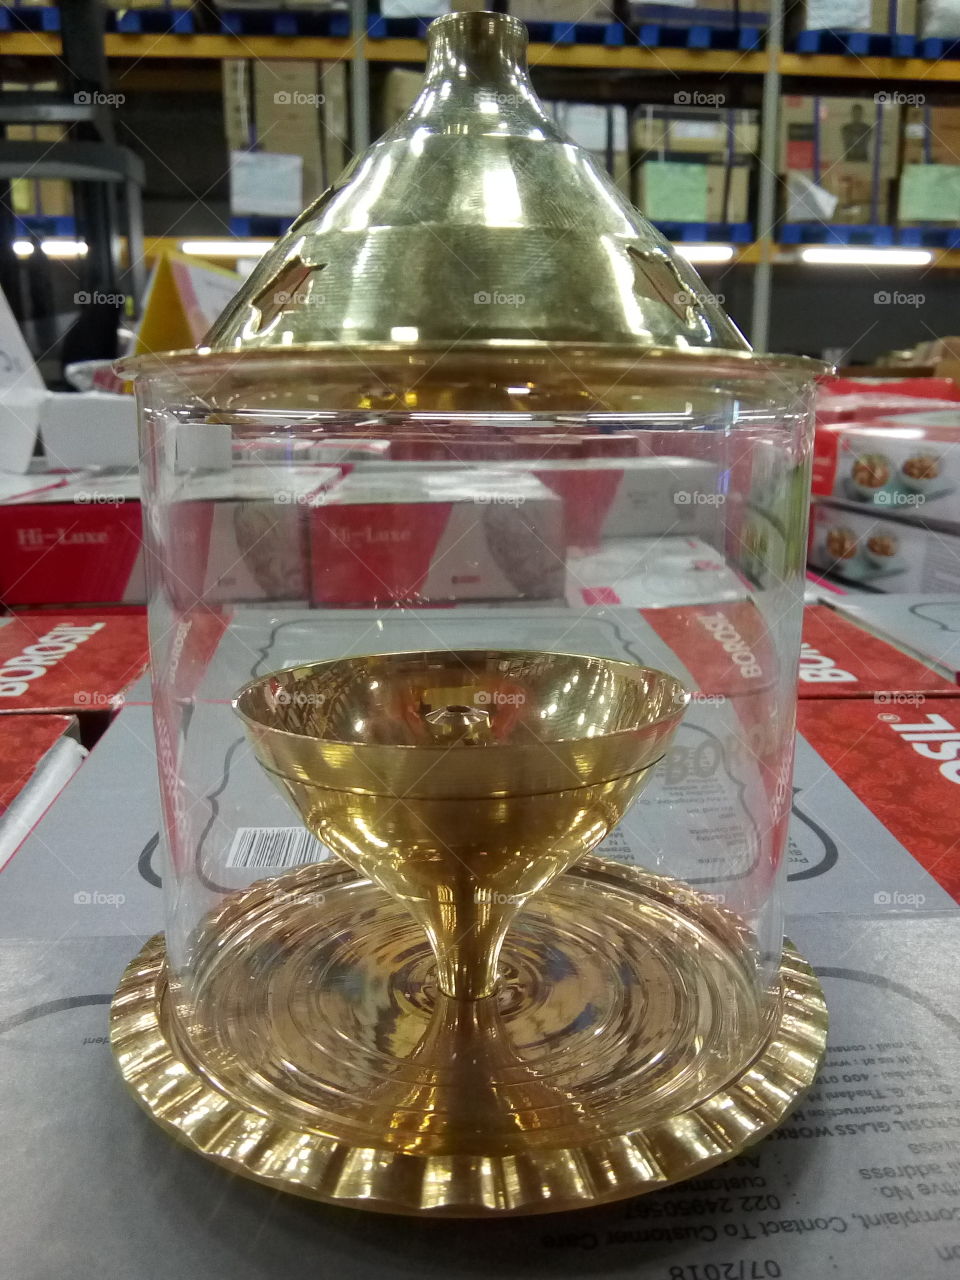 a beautiful jot (lamp) for religious purpose.